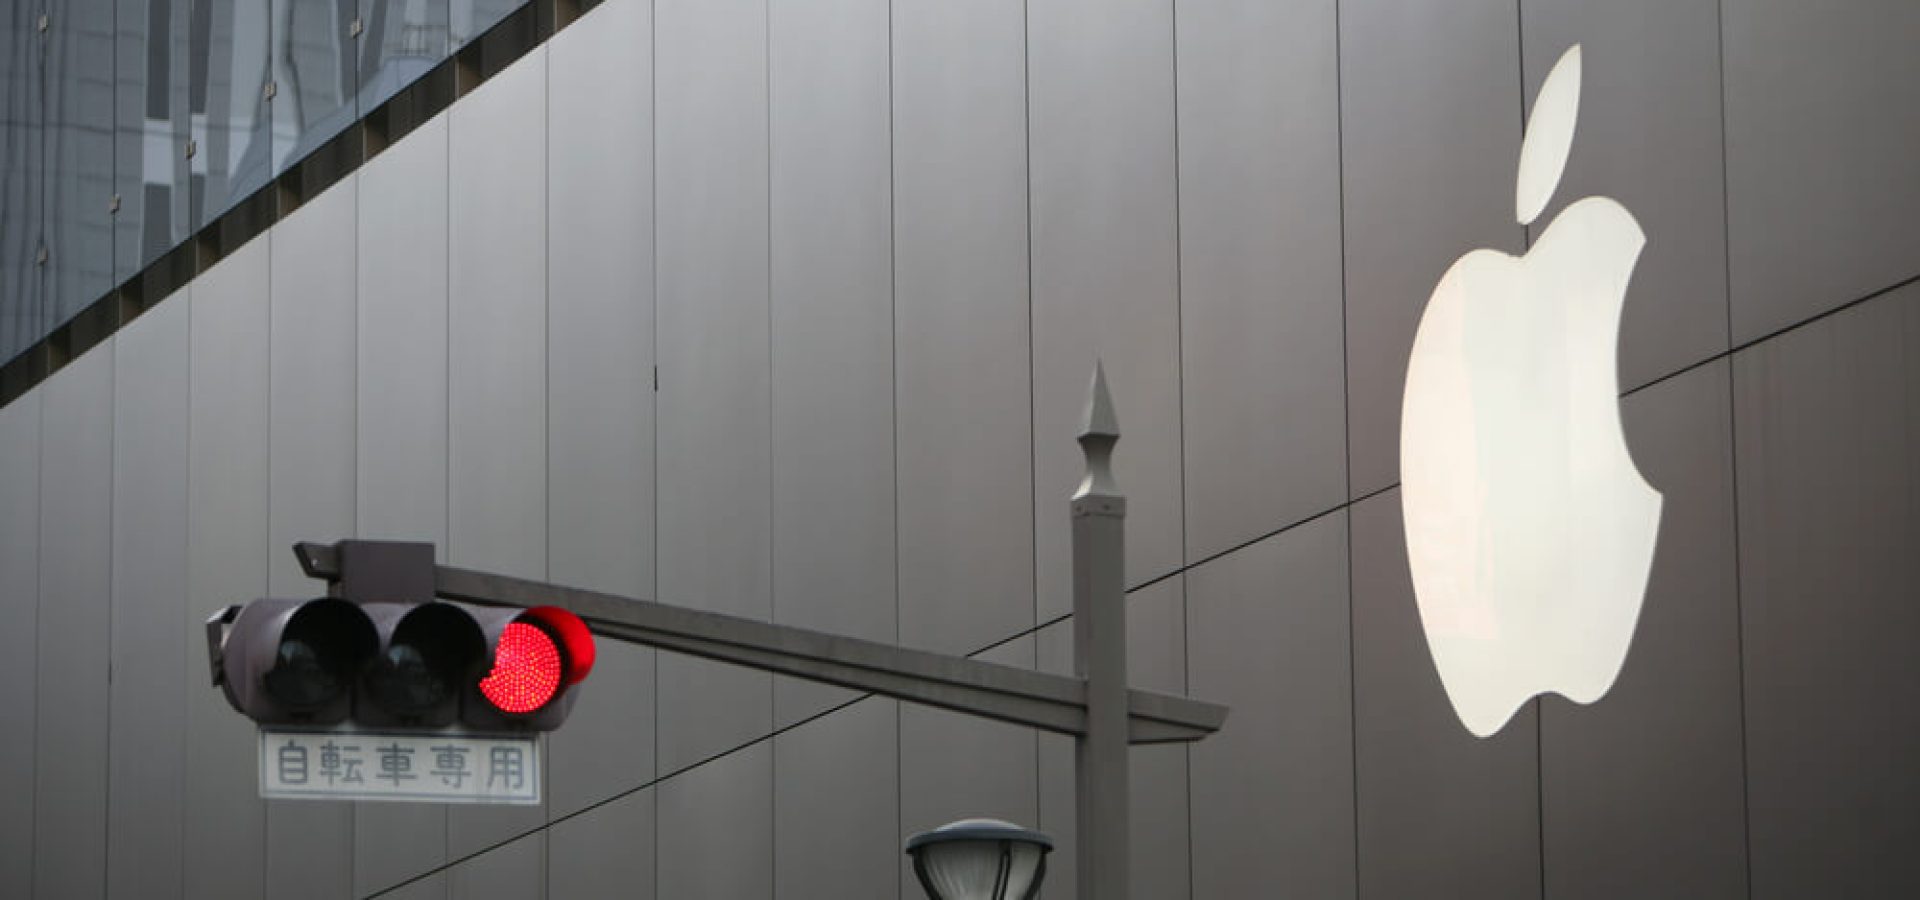 Red traffic light before the Apple company building